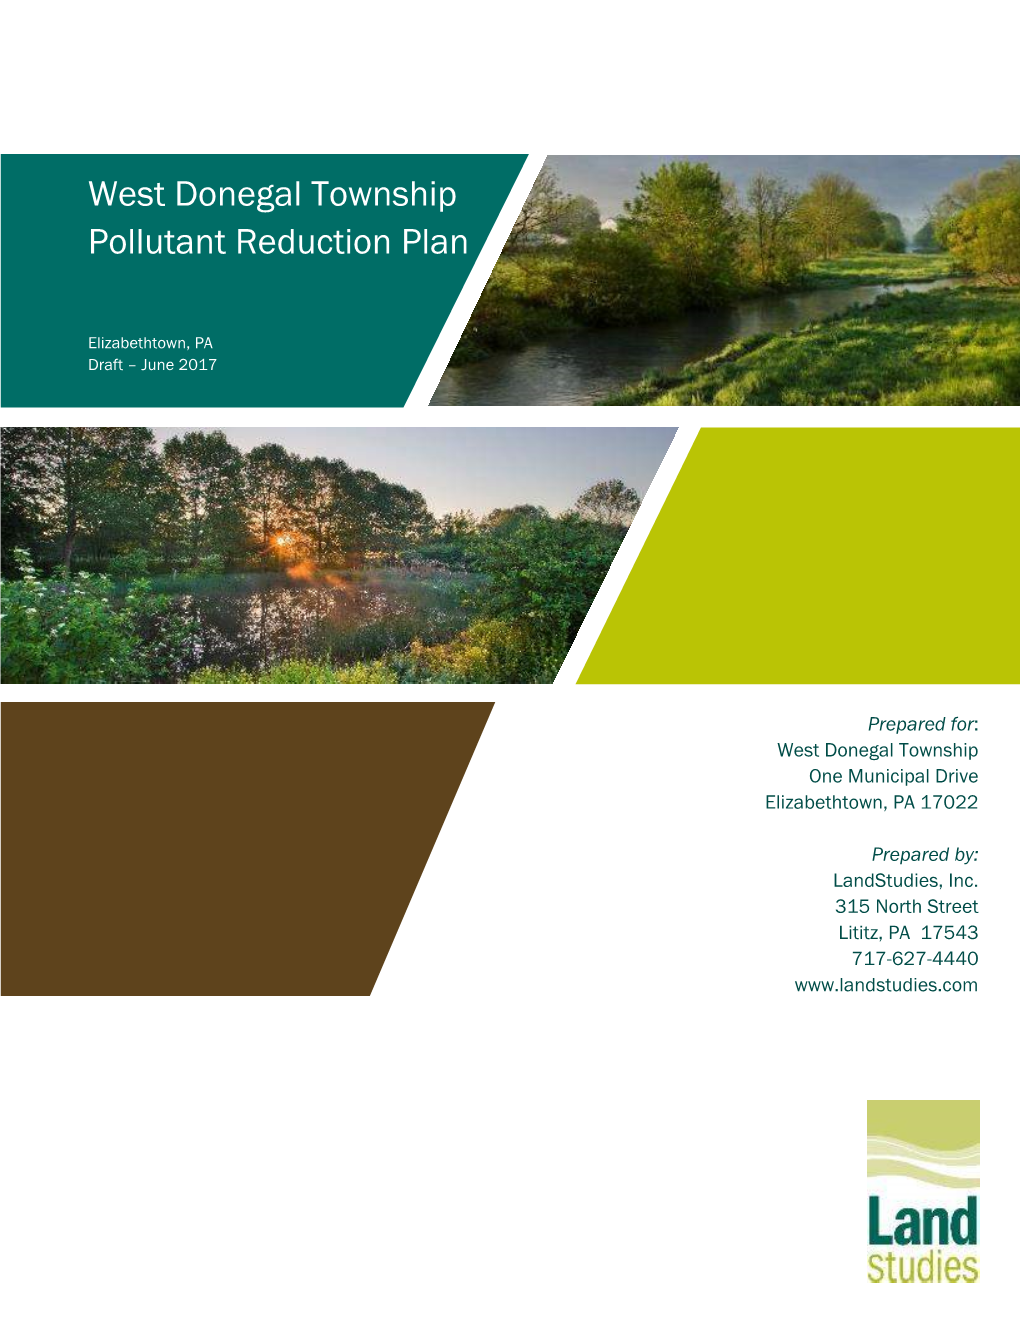 West Donegal Township Pollutant Reduction Plan Draft - June 2017